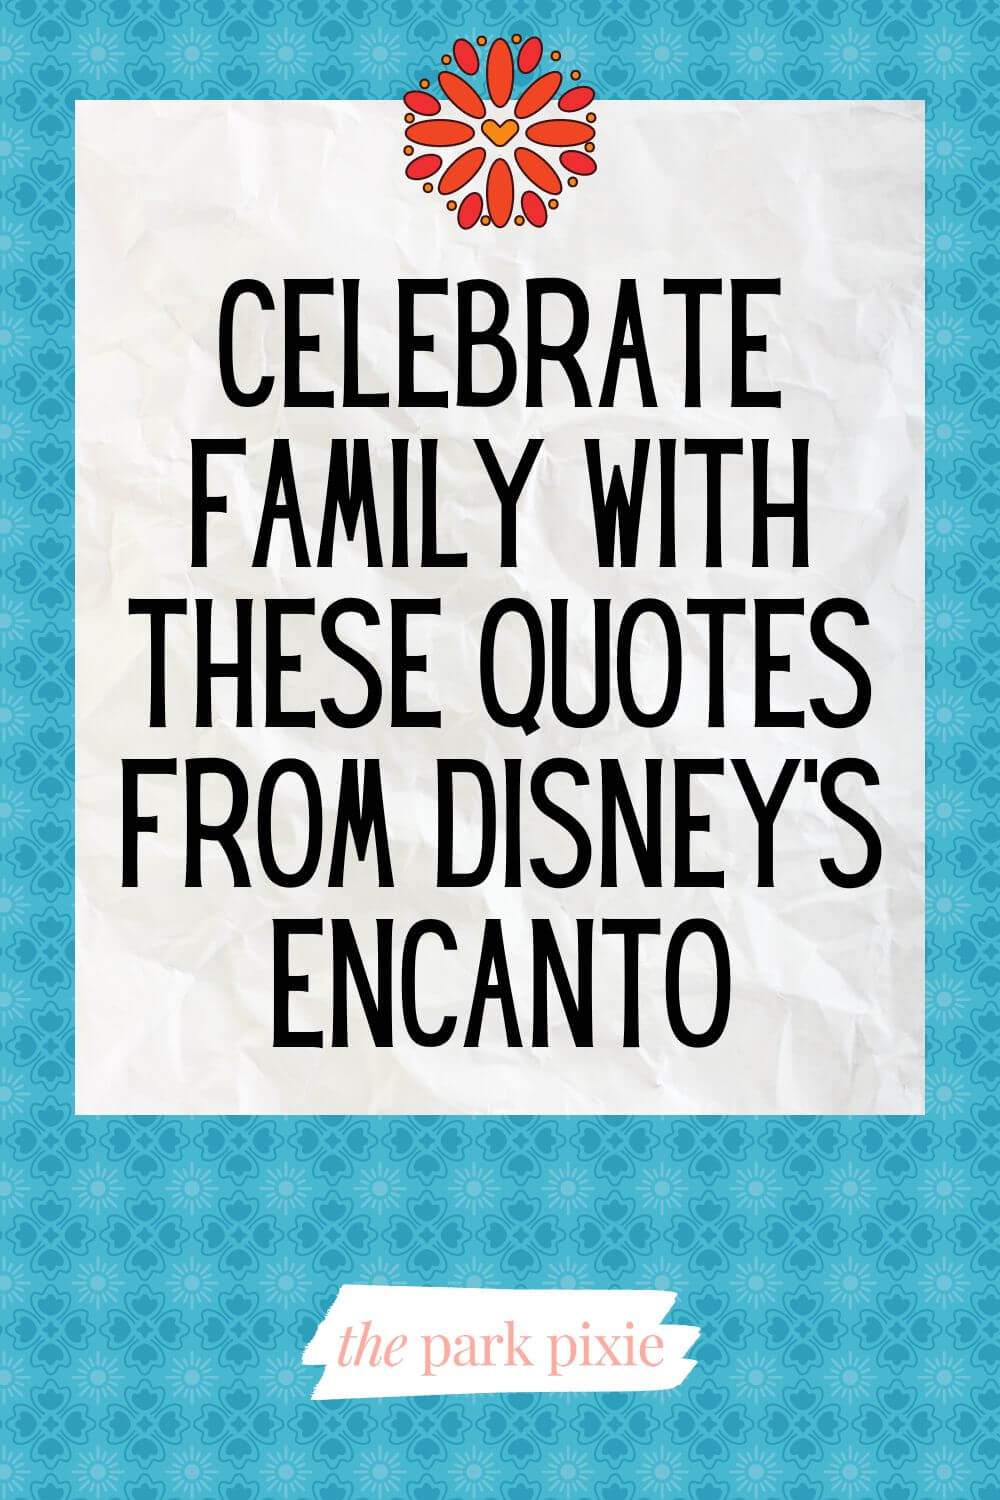 Graphic with a turquoise background with a red flower at the top. Text in the middle reads "Celebrate Family with These Quotes from Disney's Encanto."